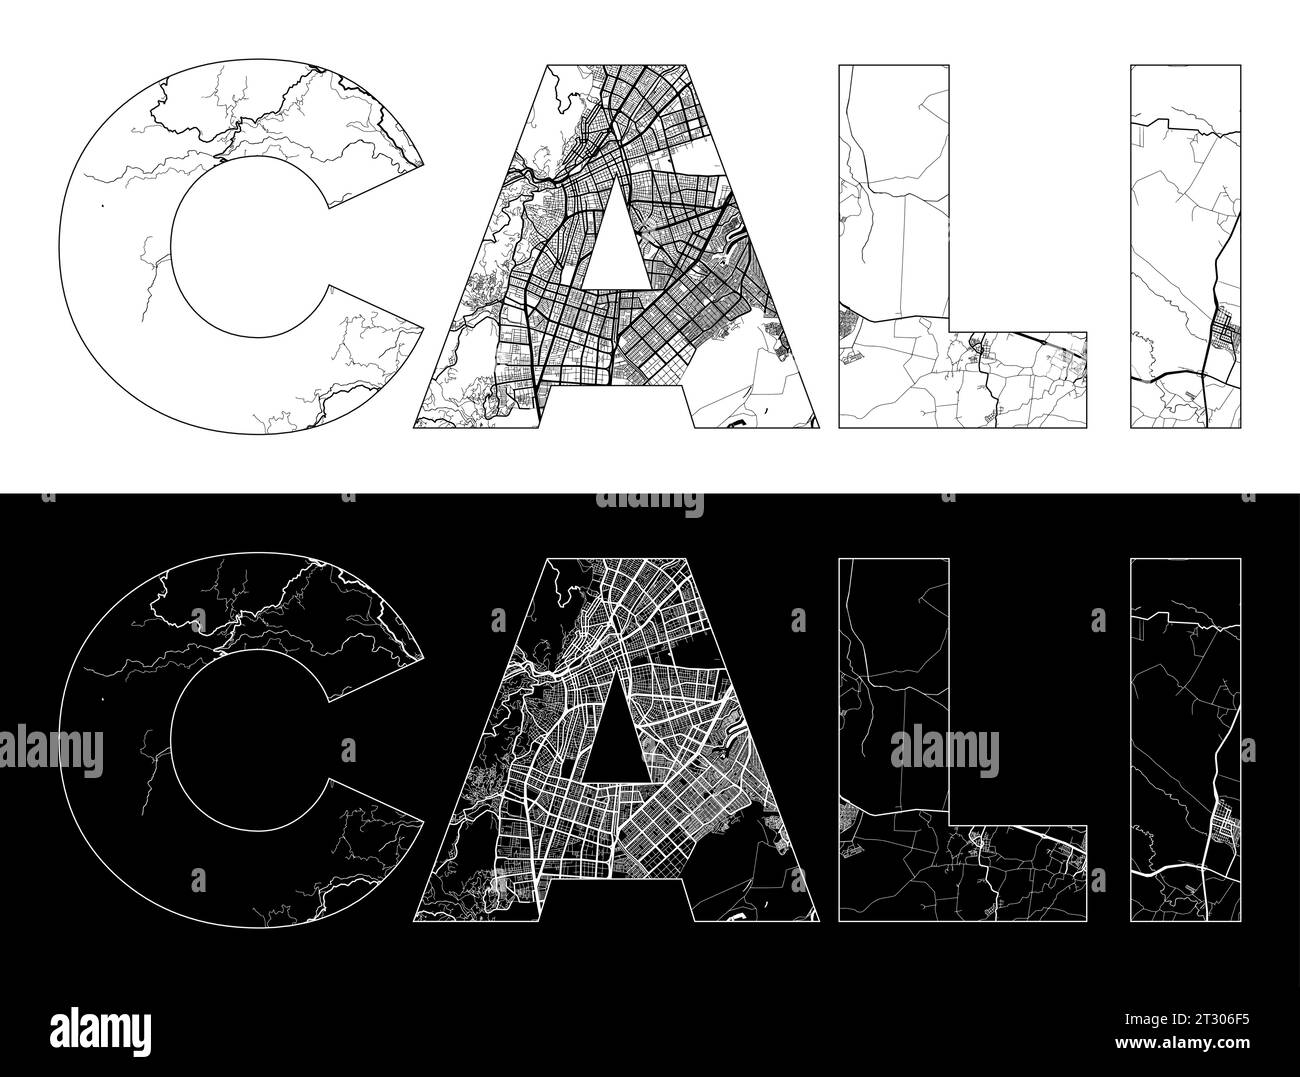 Cali City Name (Colombia, South America) with black white city map illustration vector Stock Vector